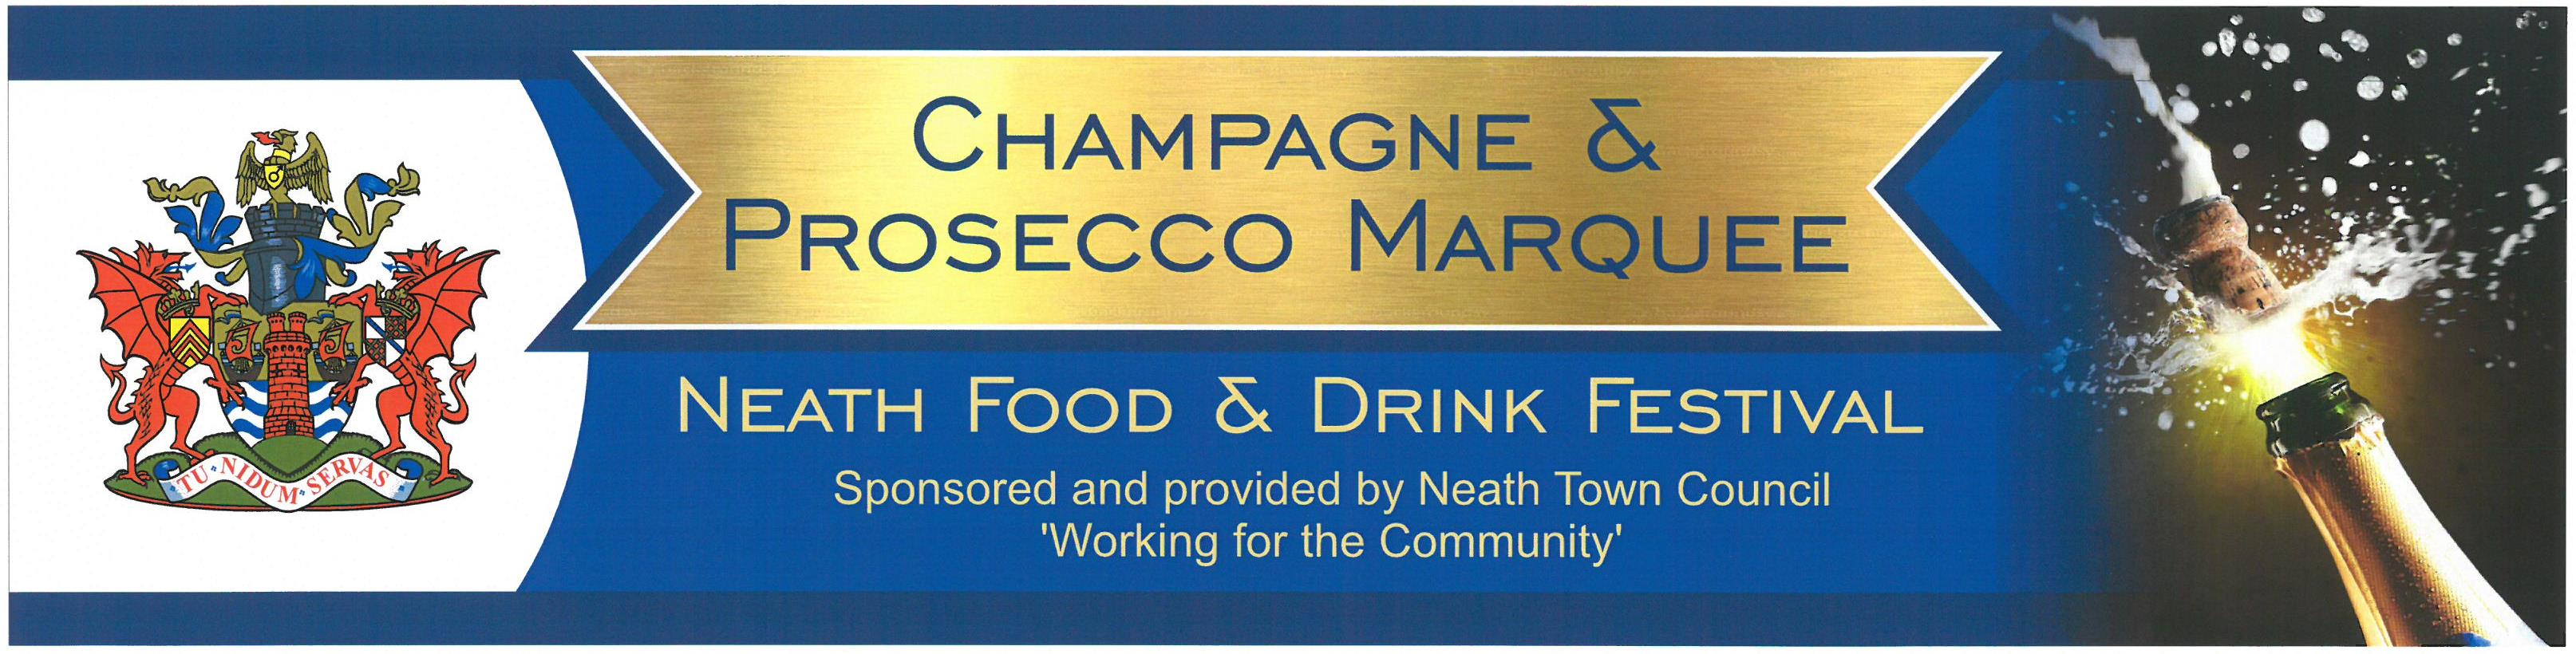 Champagne Marquee - Neath Food & Drink Festival 2019